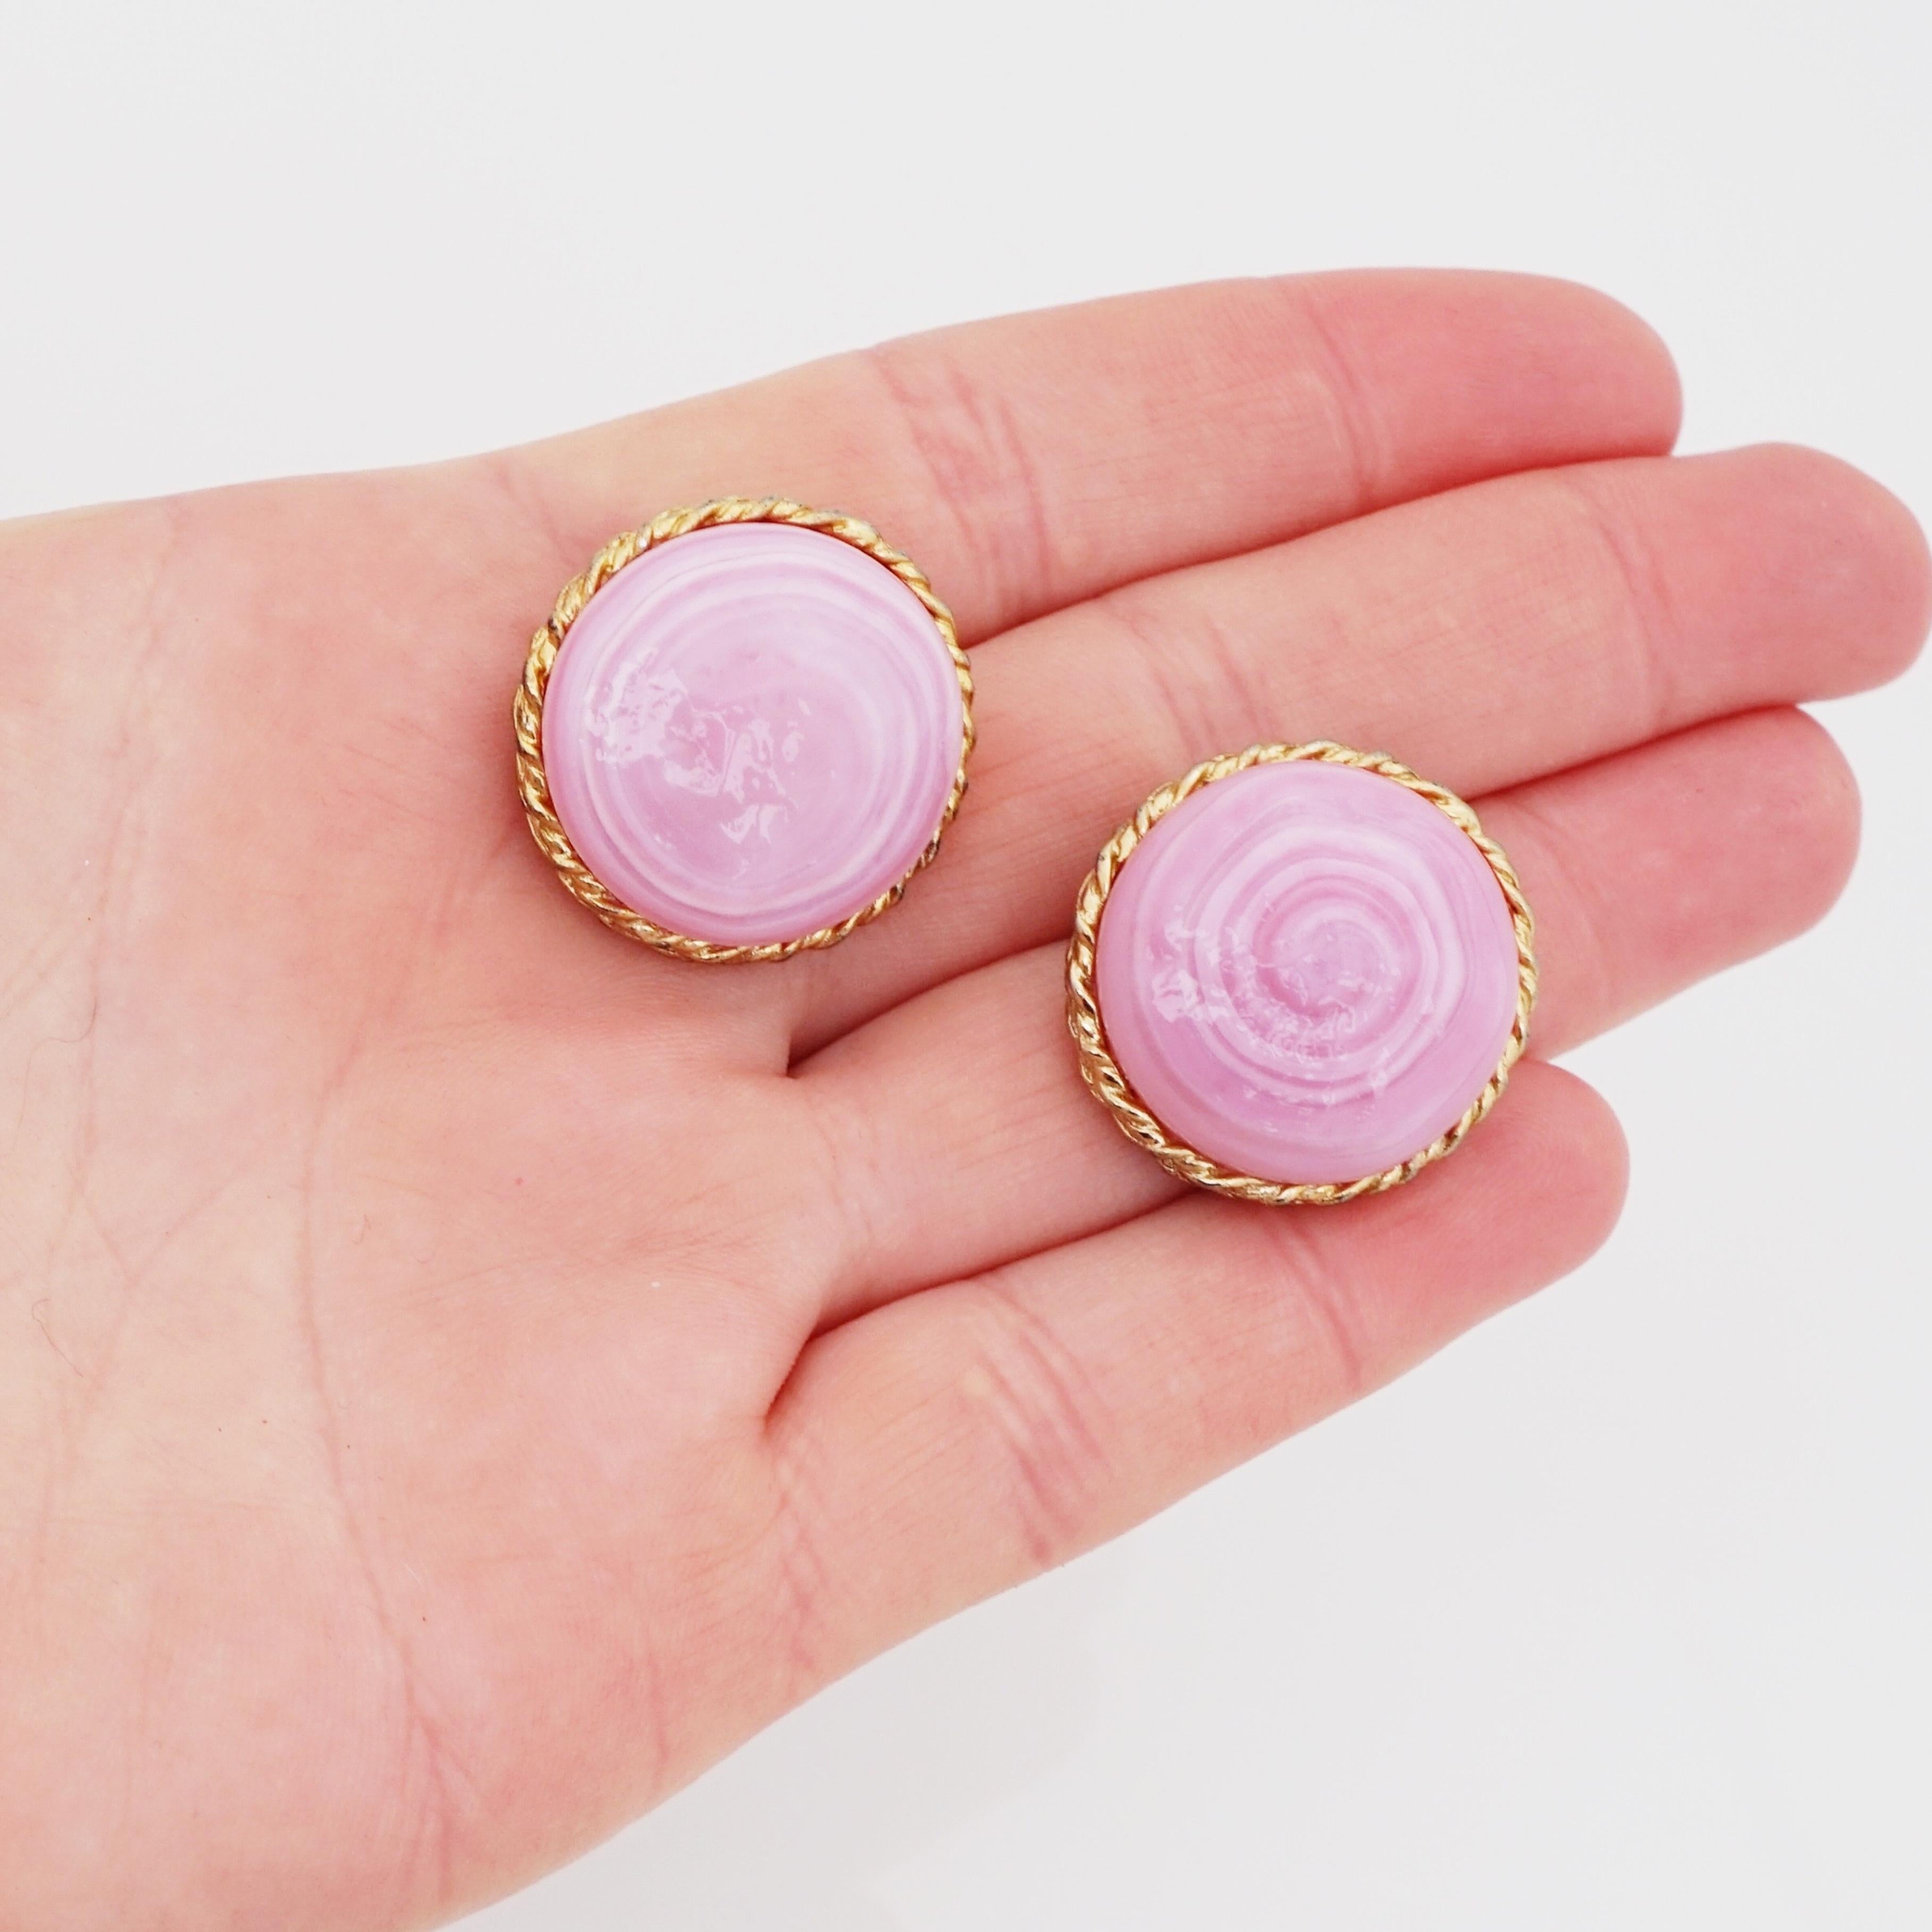 Women's Milky Pink Art Glass Hard Candy Earrings By Vogue, 1960s For Sale